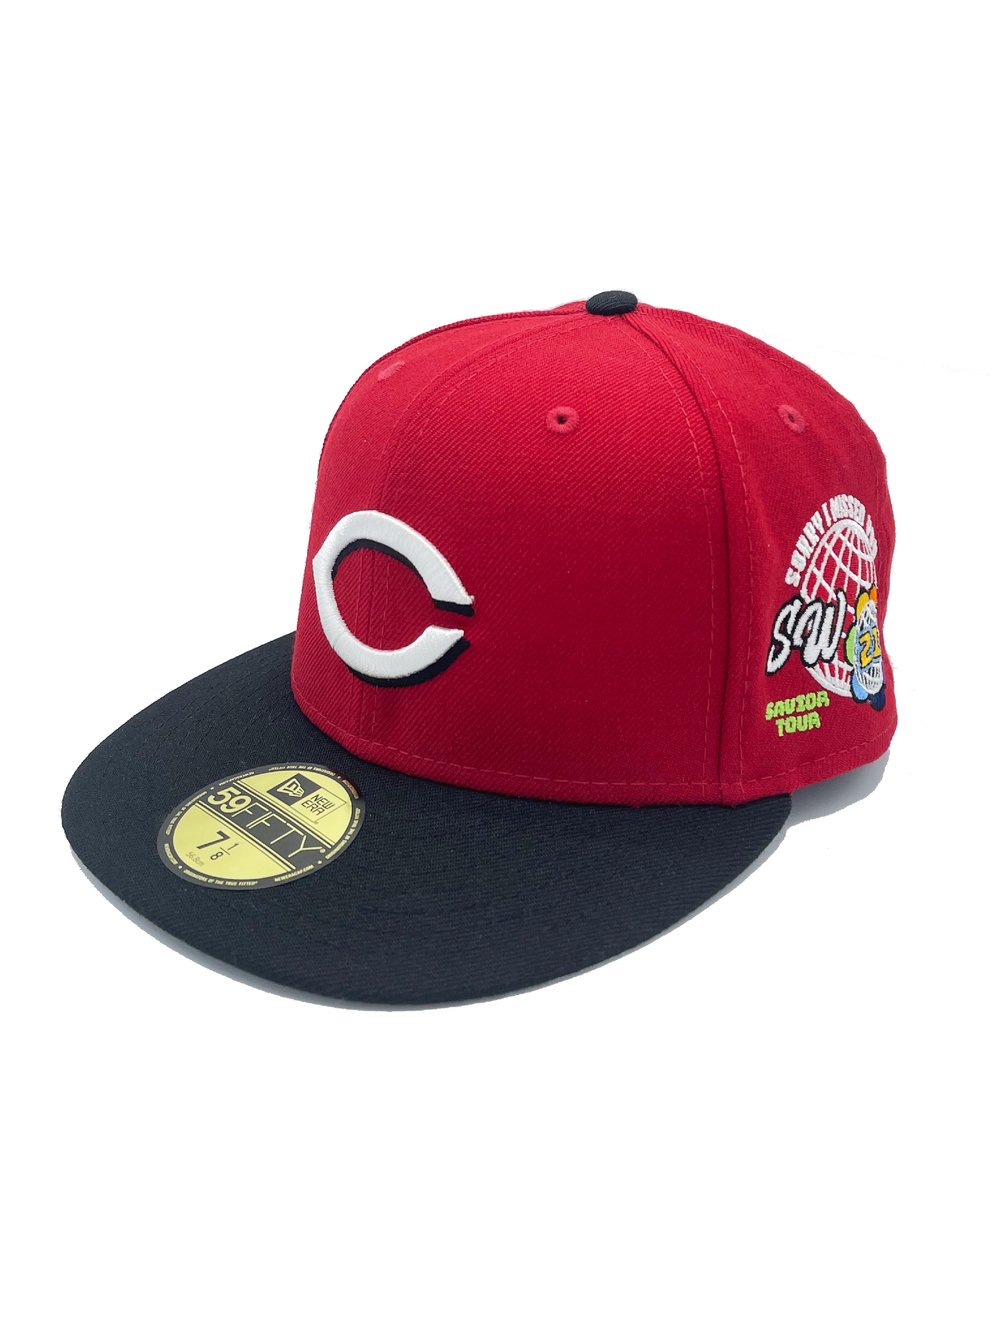 Image of  Cincinati Reds Two Tone - Sorry I Missed You